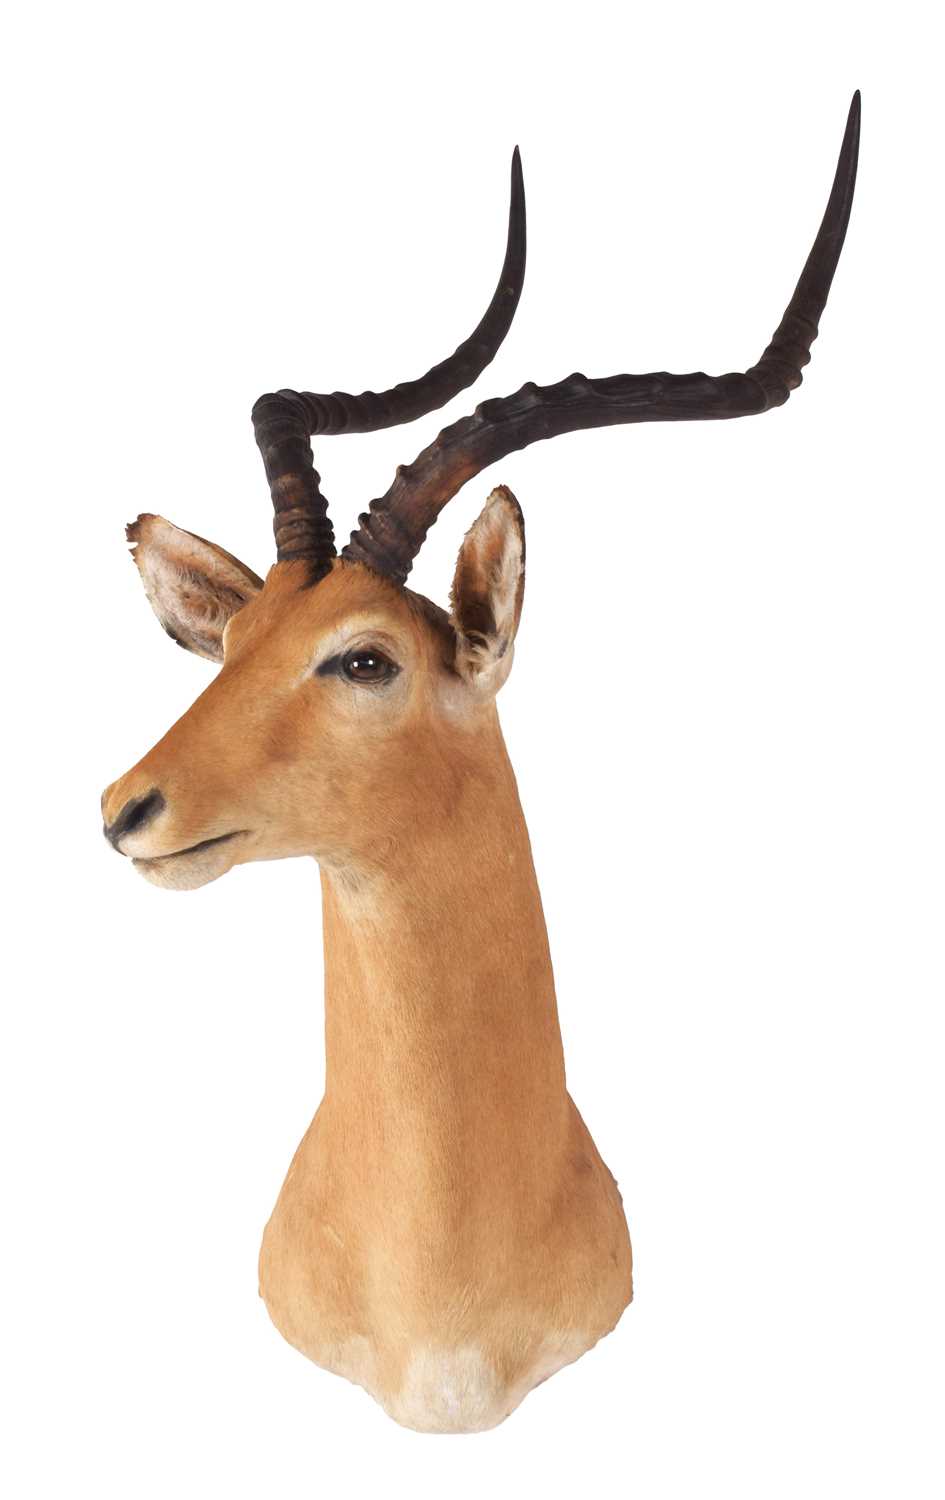 Taxidermy: Common Impala (Aepyceros Melampus), 21st century, South Africa, adult male shoulder mount